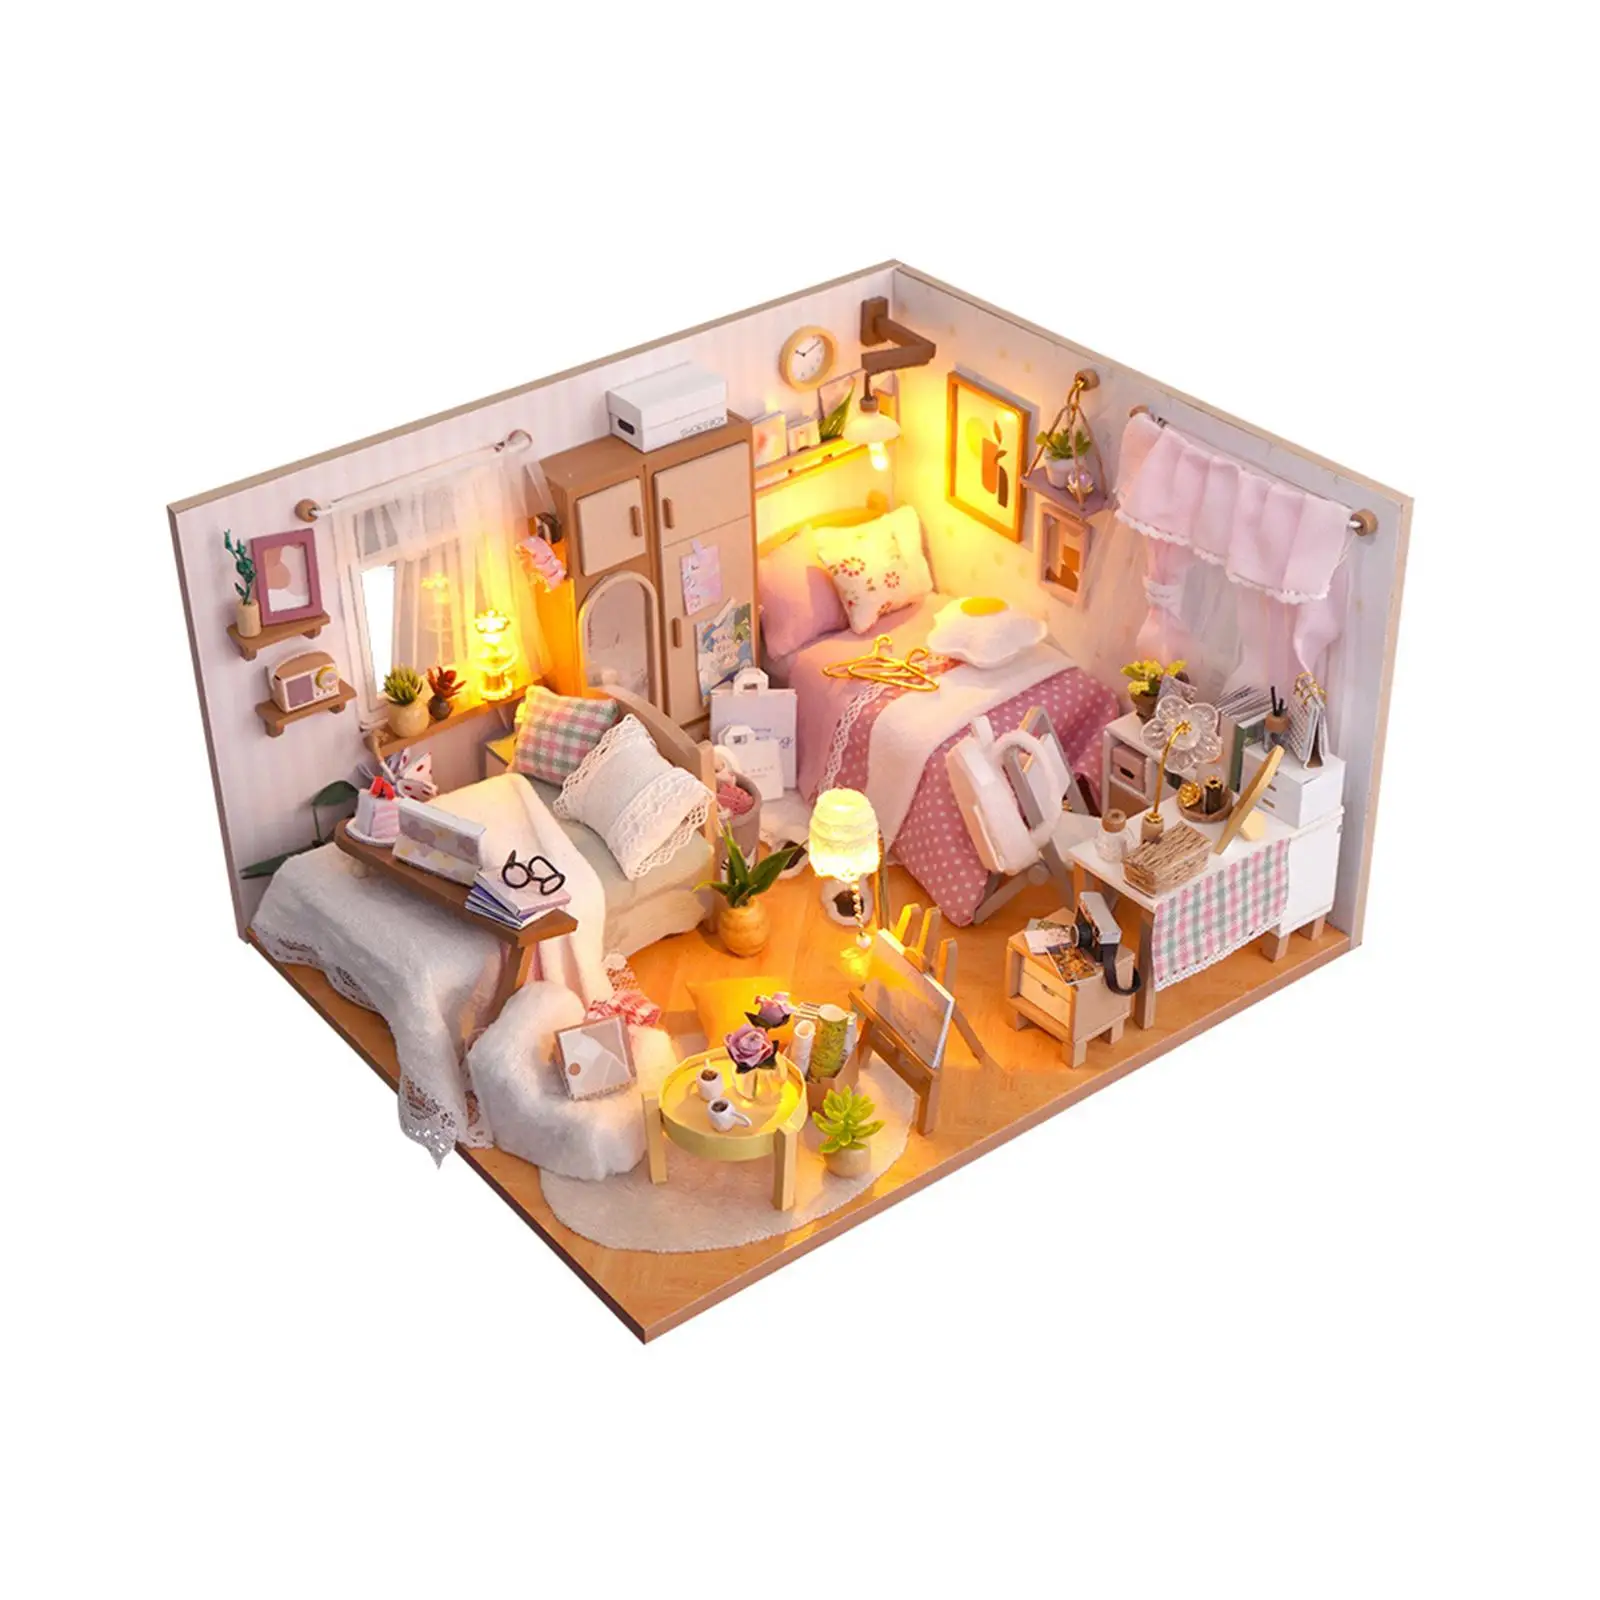 Wooden Miniature Dollhouse Kits Modern for Boys Girls Collectibles Room Box